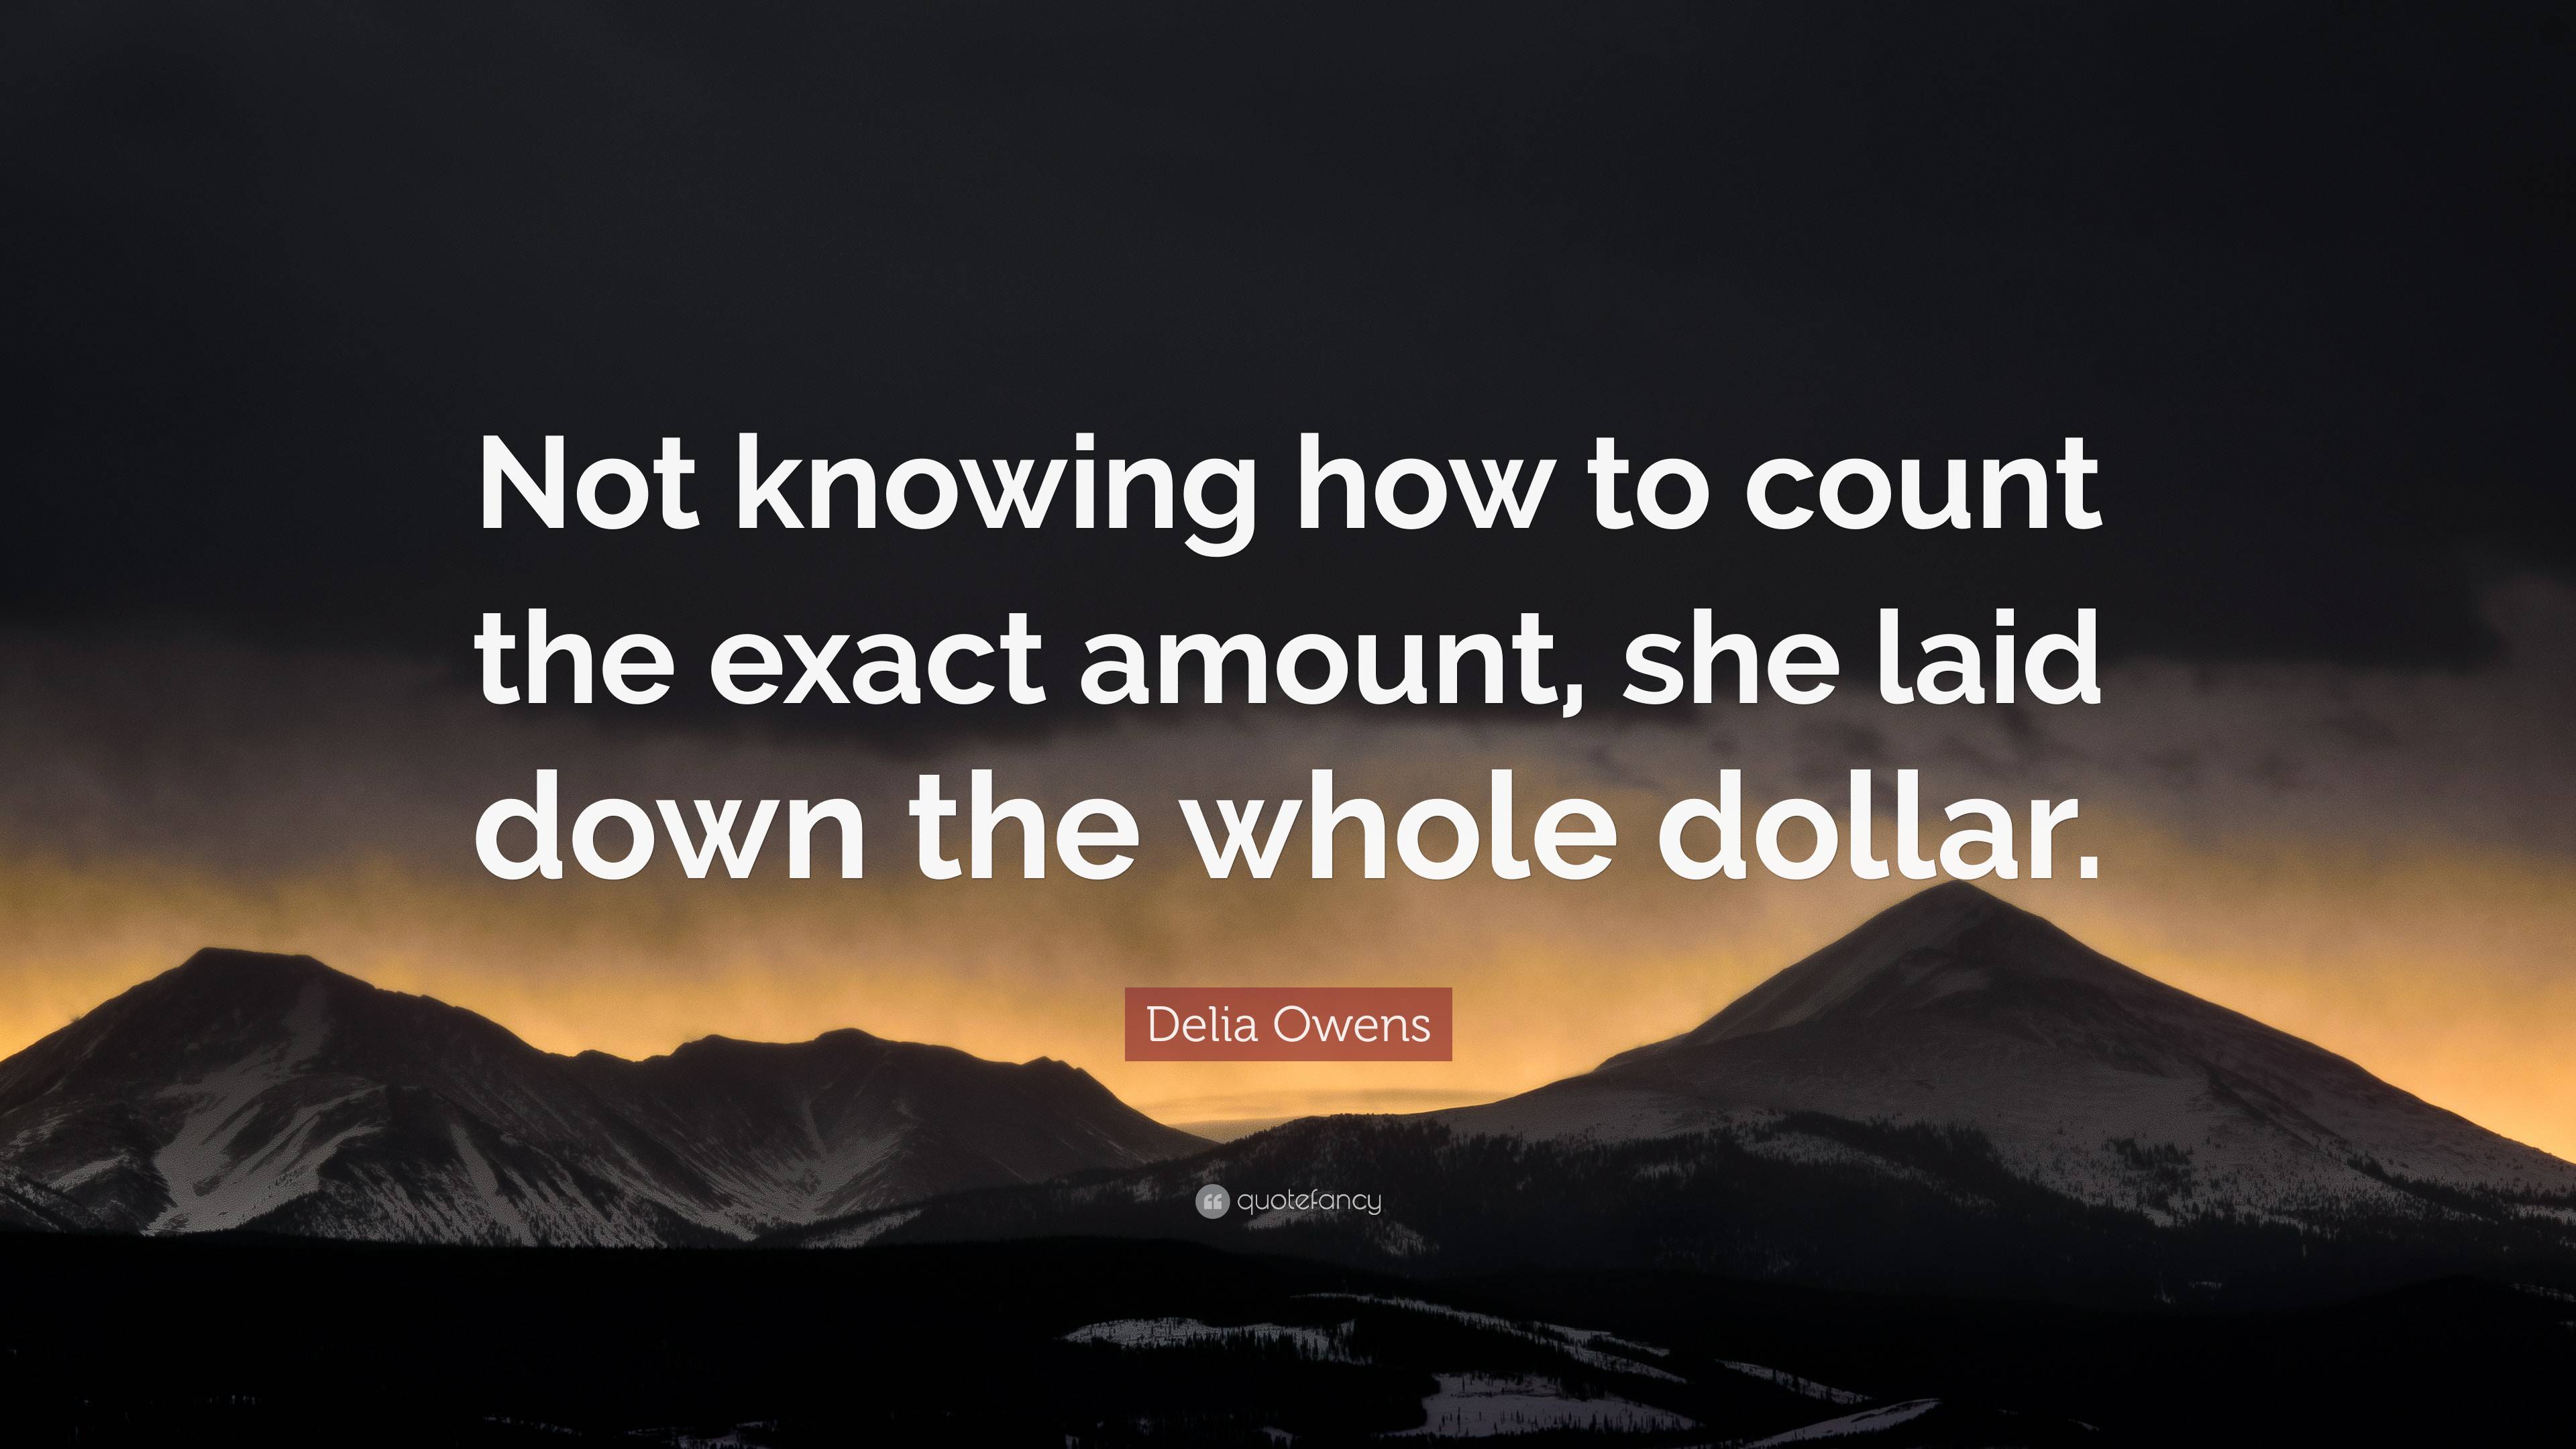 Delia Owens Quote: “Not knowing how to count the exact amount, she laid ...